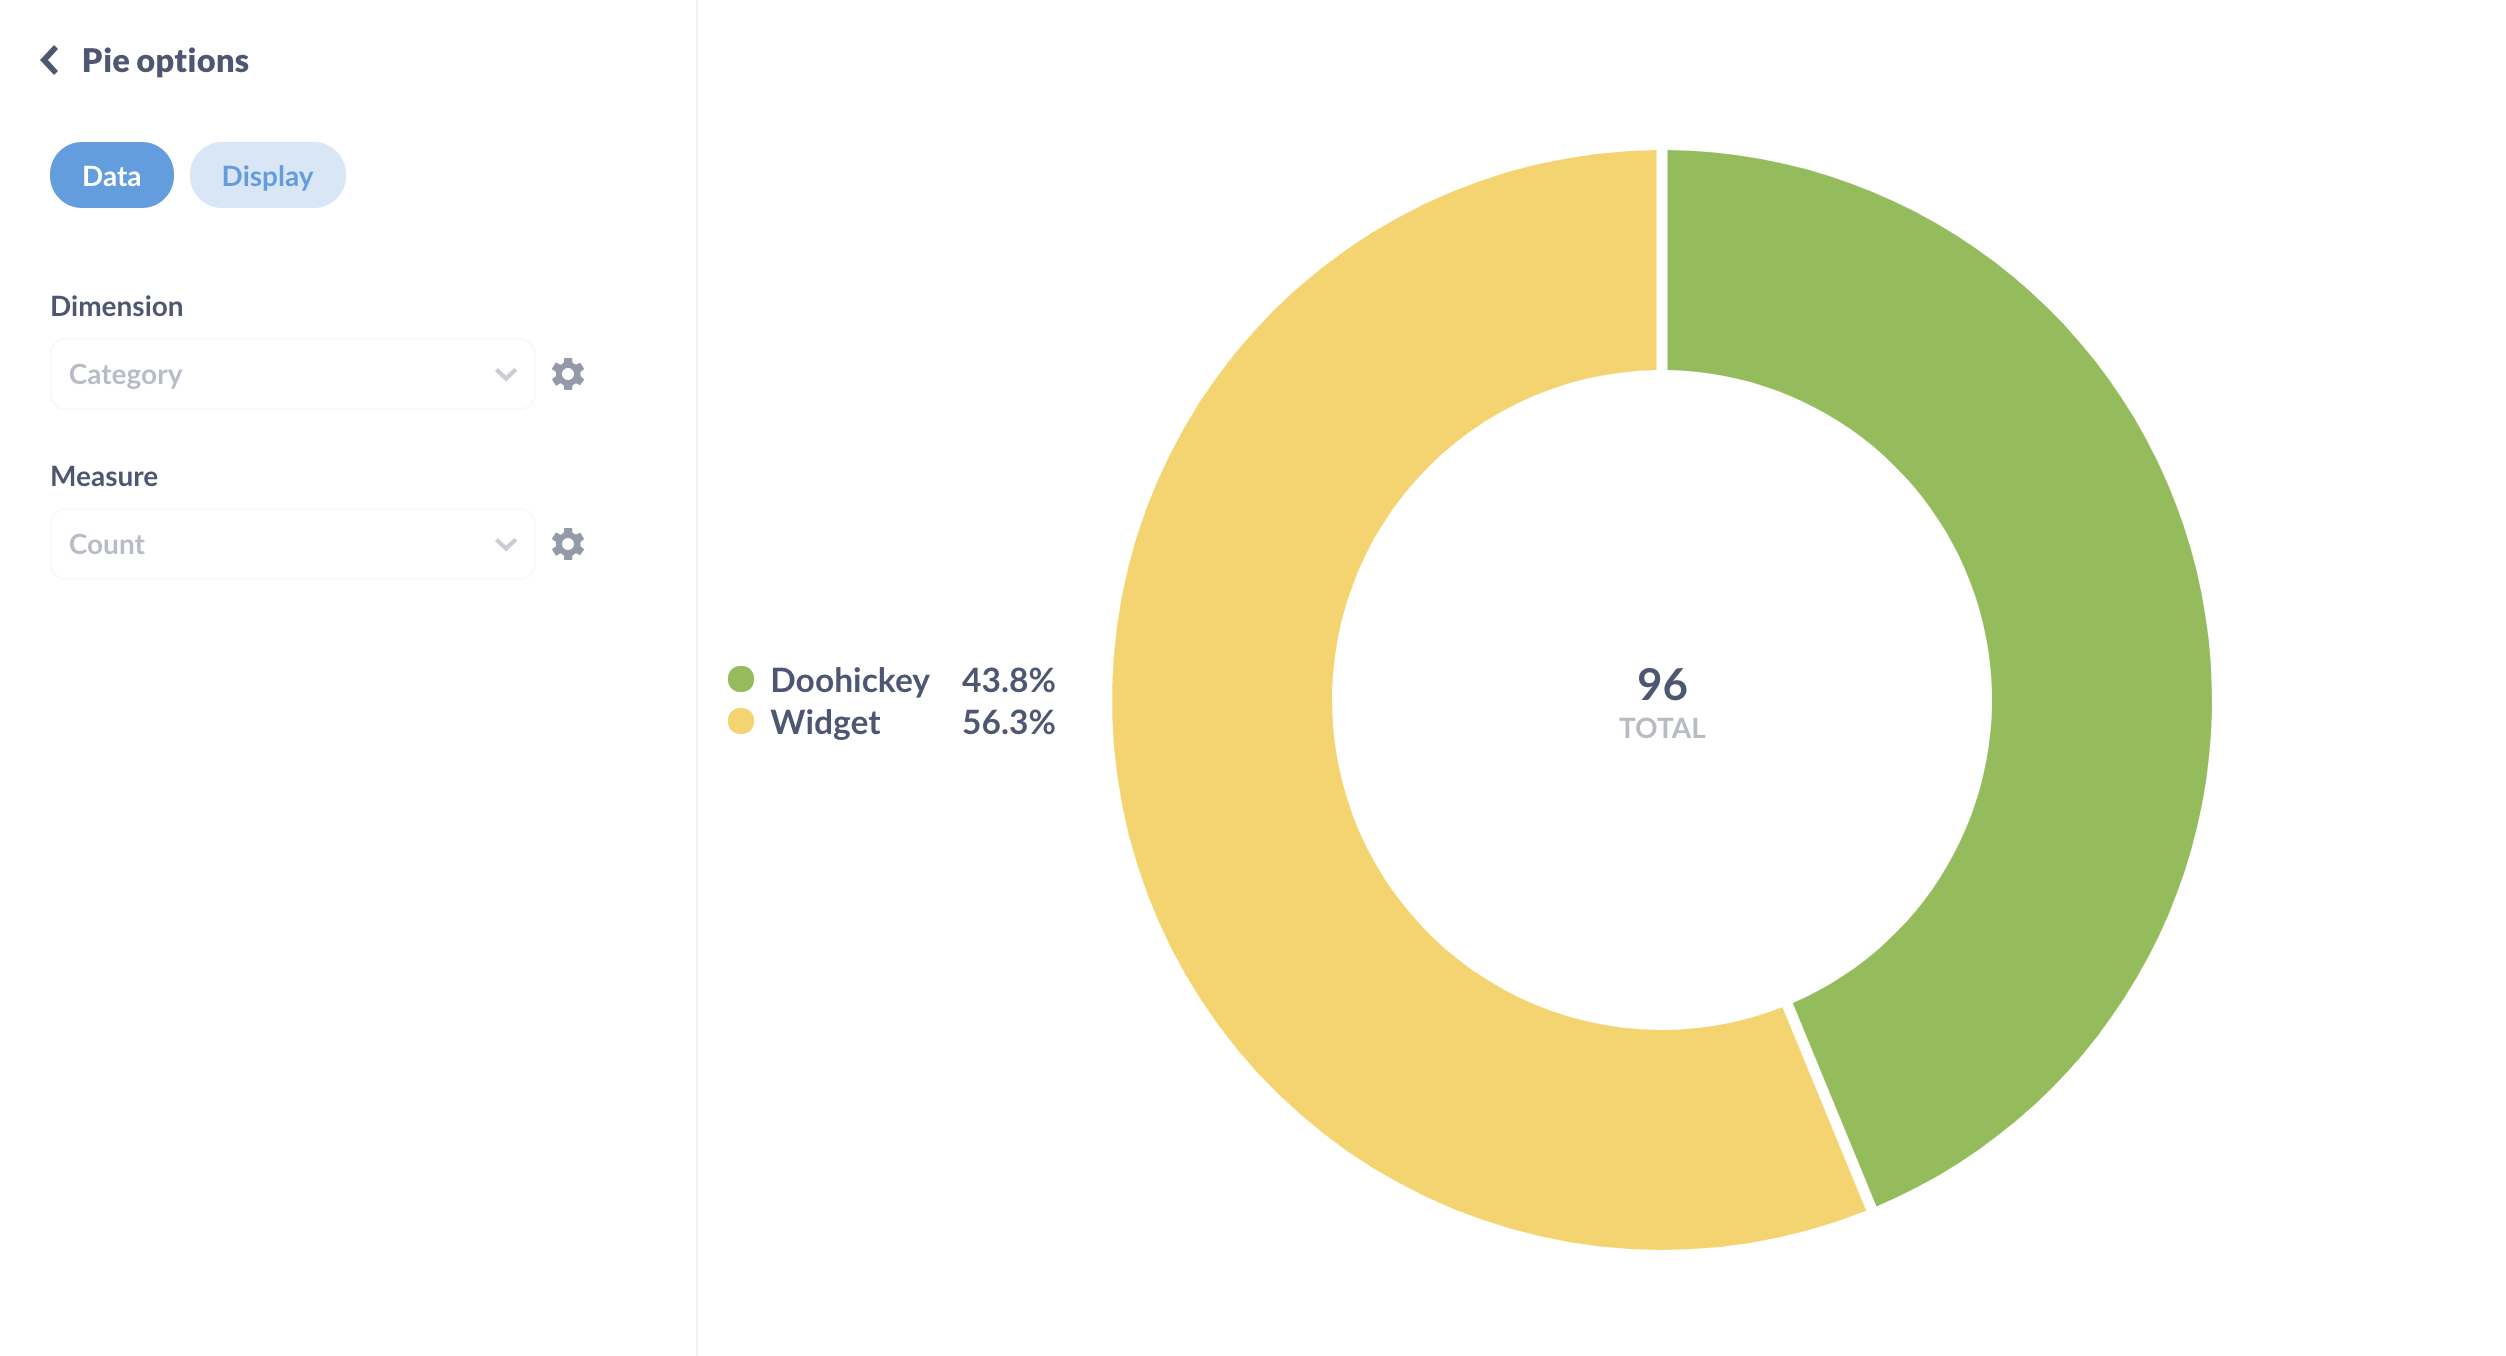 A donut chart showing the composition of products over two categories: Doohickey and Widget.